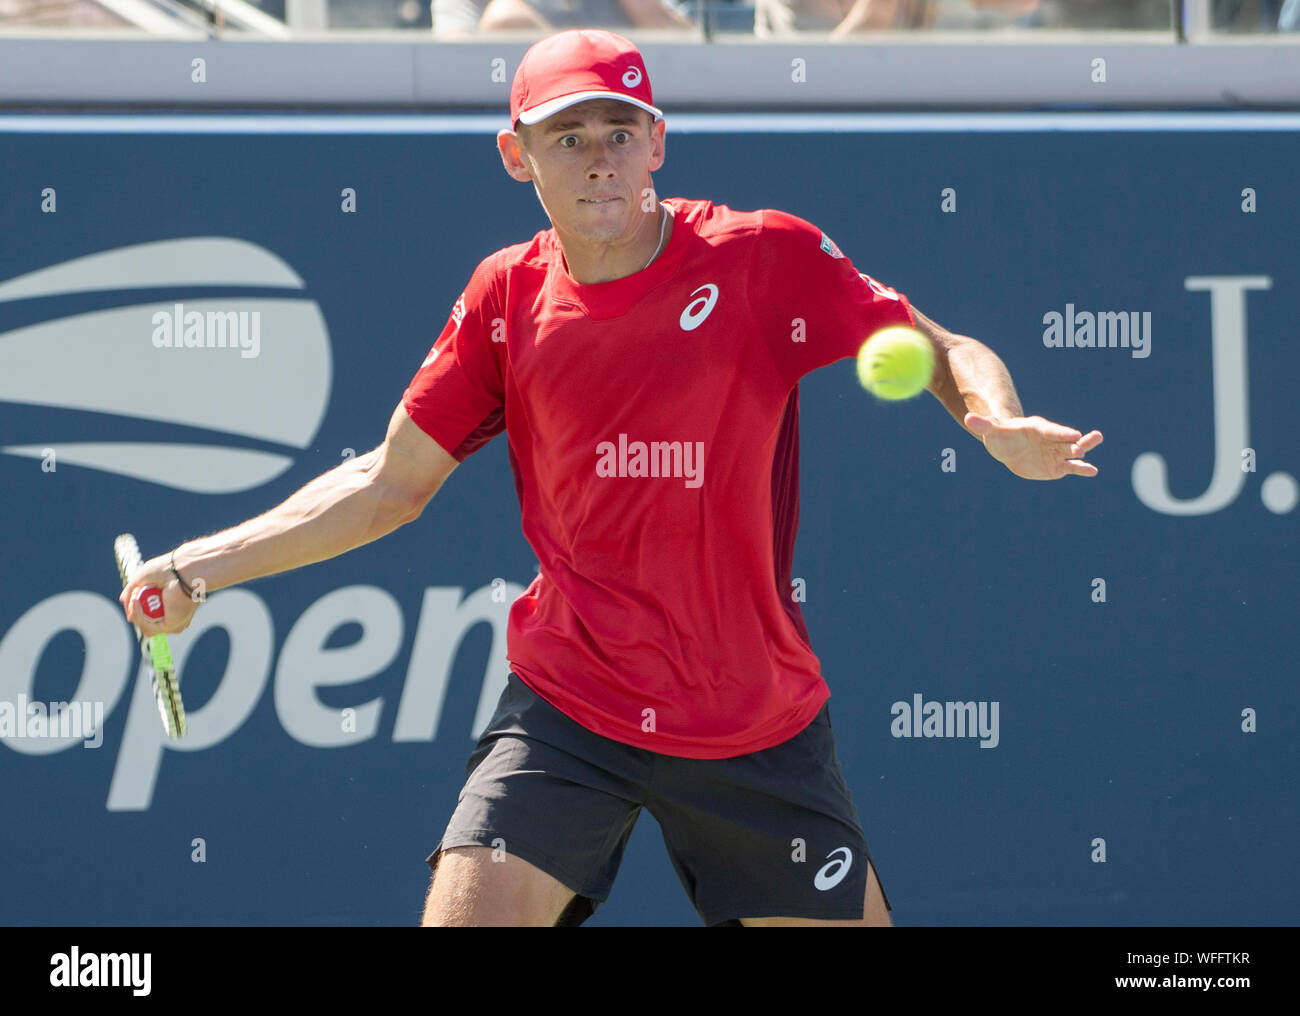 August 30, 2019: Alex de Minaur (AUS) defeated Kei Nishikori (JPN) 6-2, 6-4, 2-6, 6-3, at the US Open being played at Billie Jean King National Tennis Center in Flushing, Queens, NY. © Jo Becktold/CSM Stock Photo